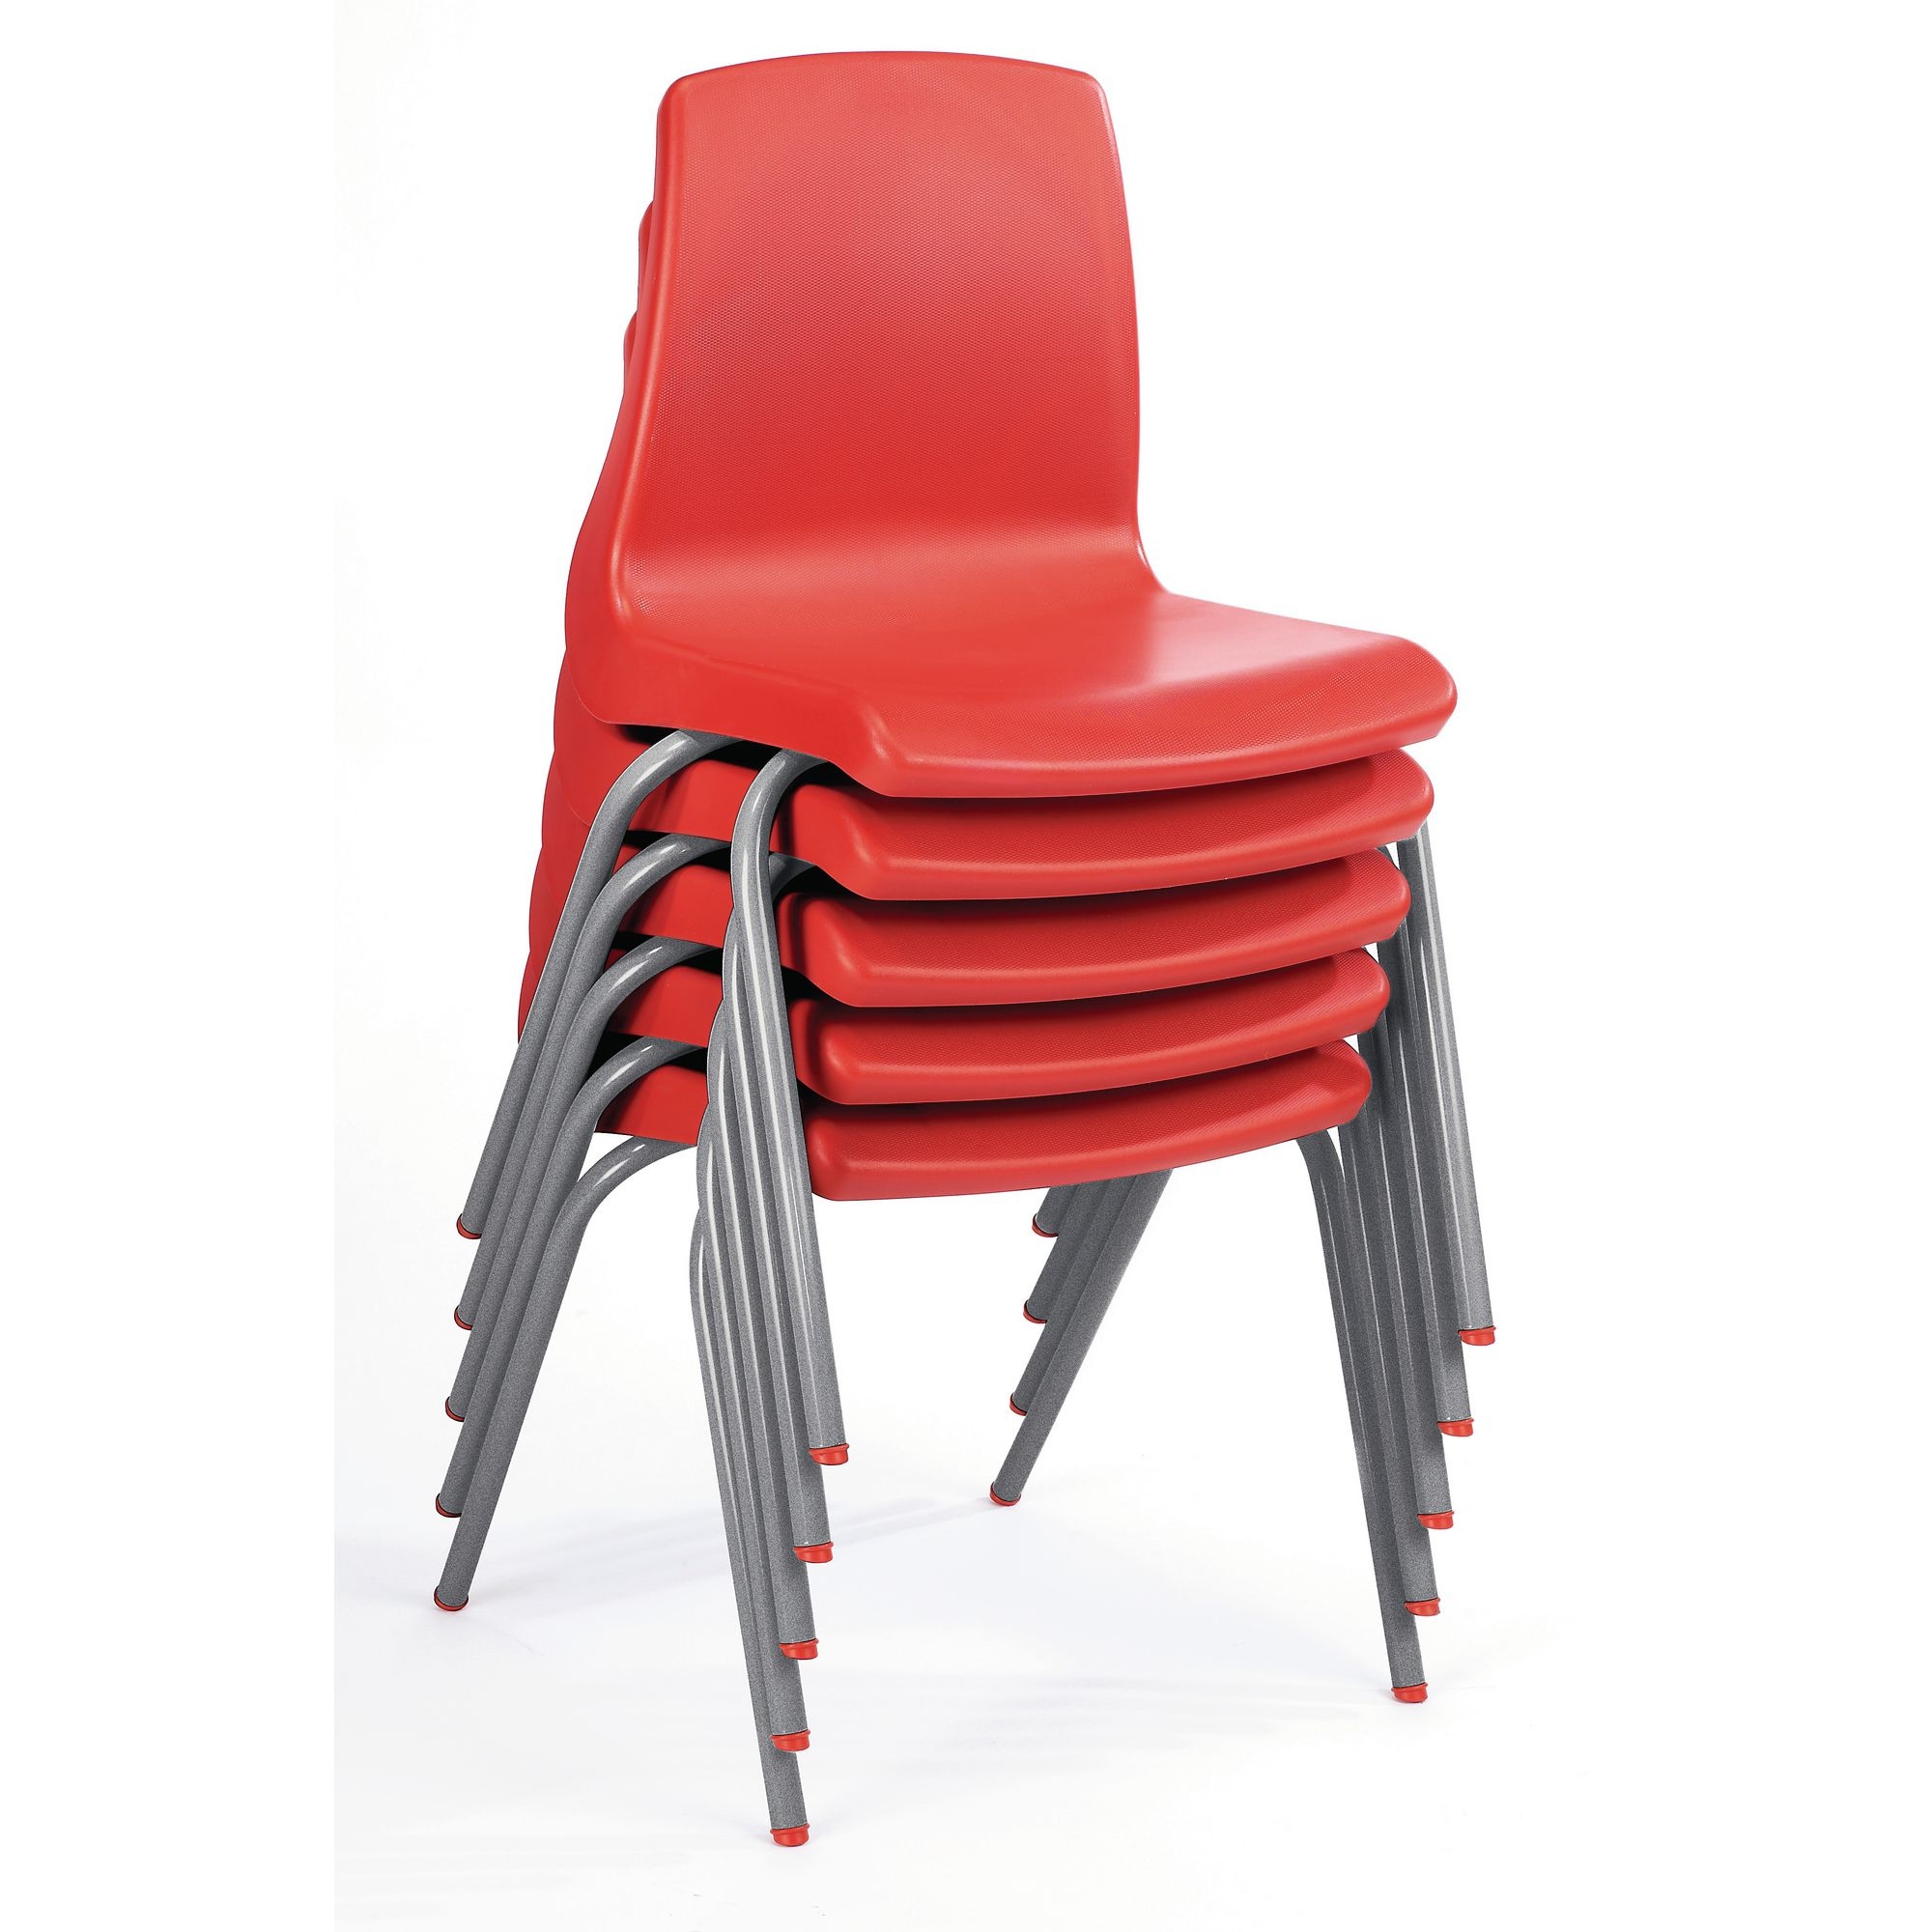 NP Chair Class Pack - Seat height: 460mm - Red - Age 14+